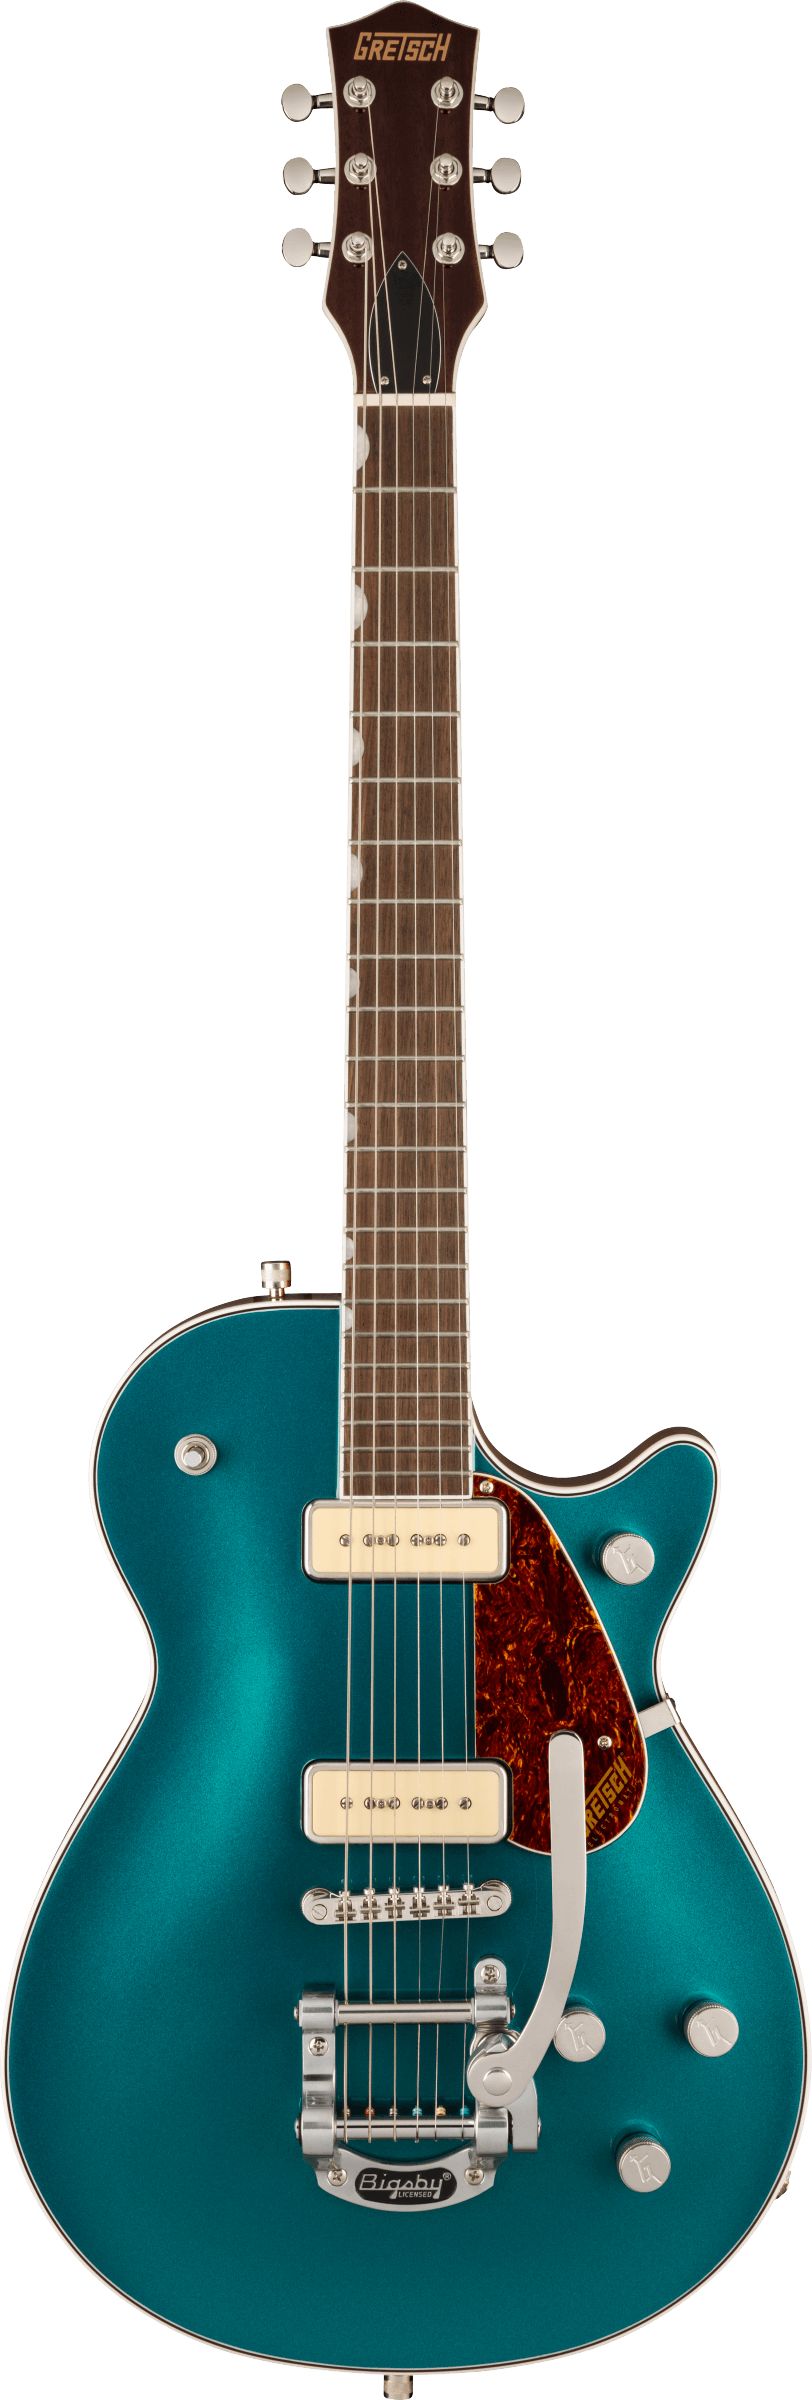 Full frontal of Gretsch G5210T-P90 EMTC JET TWO 90 PETROL.